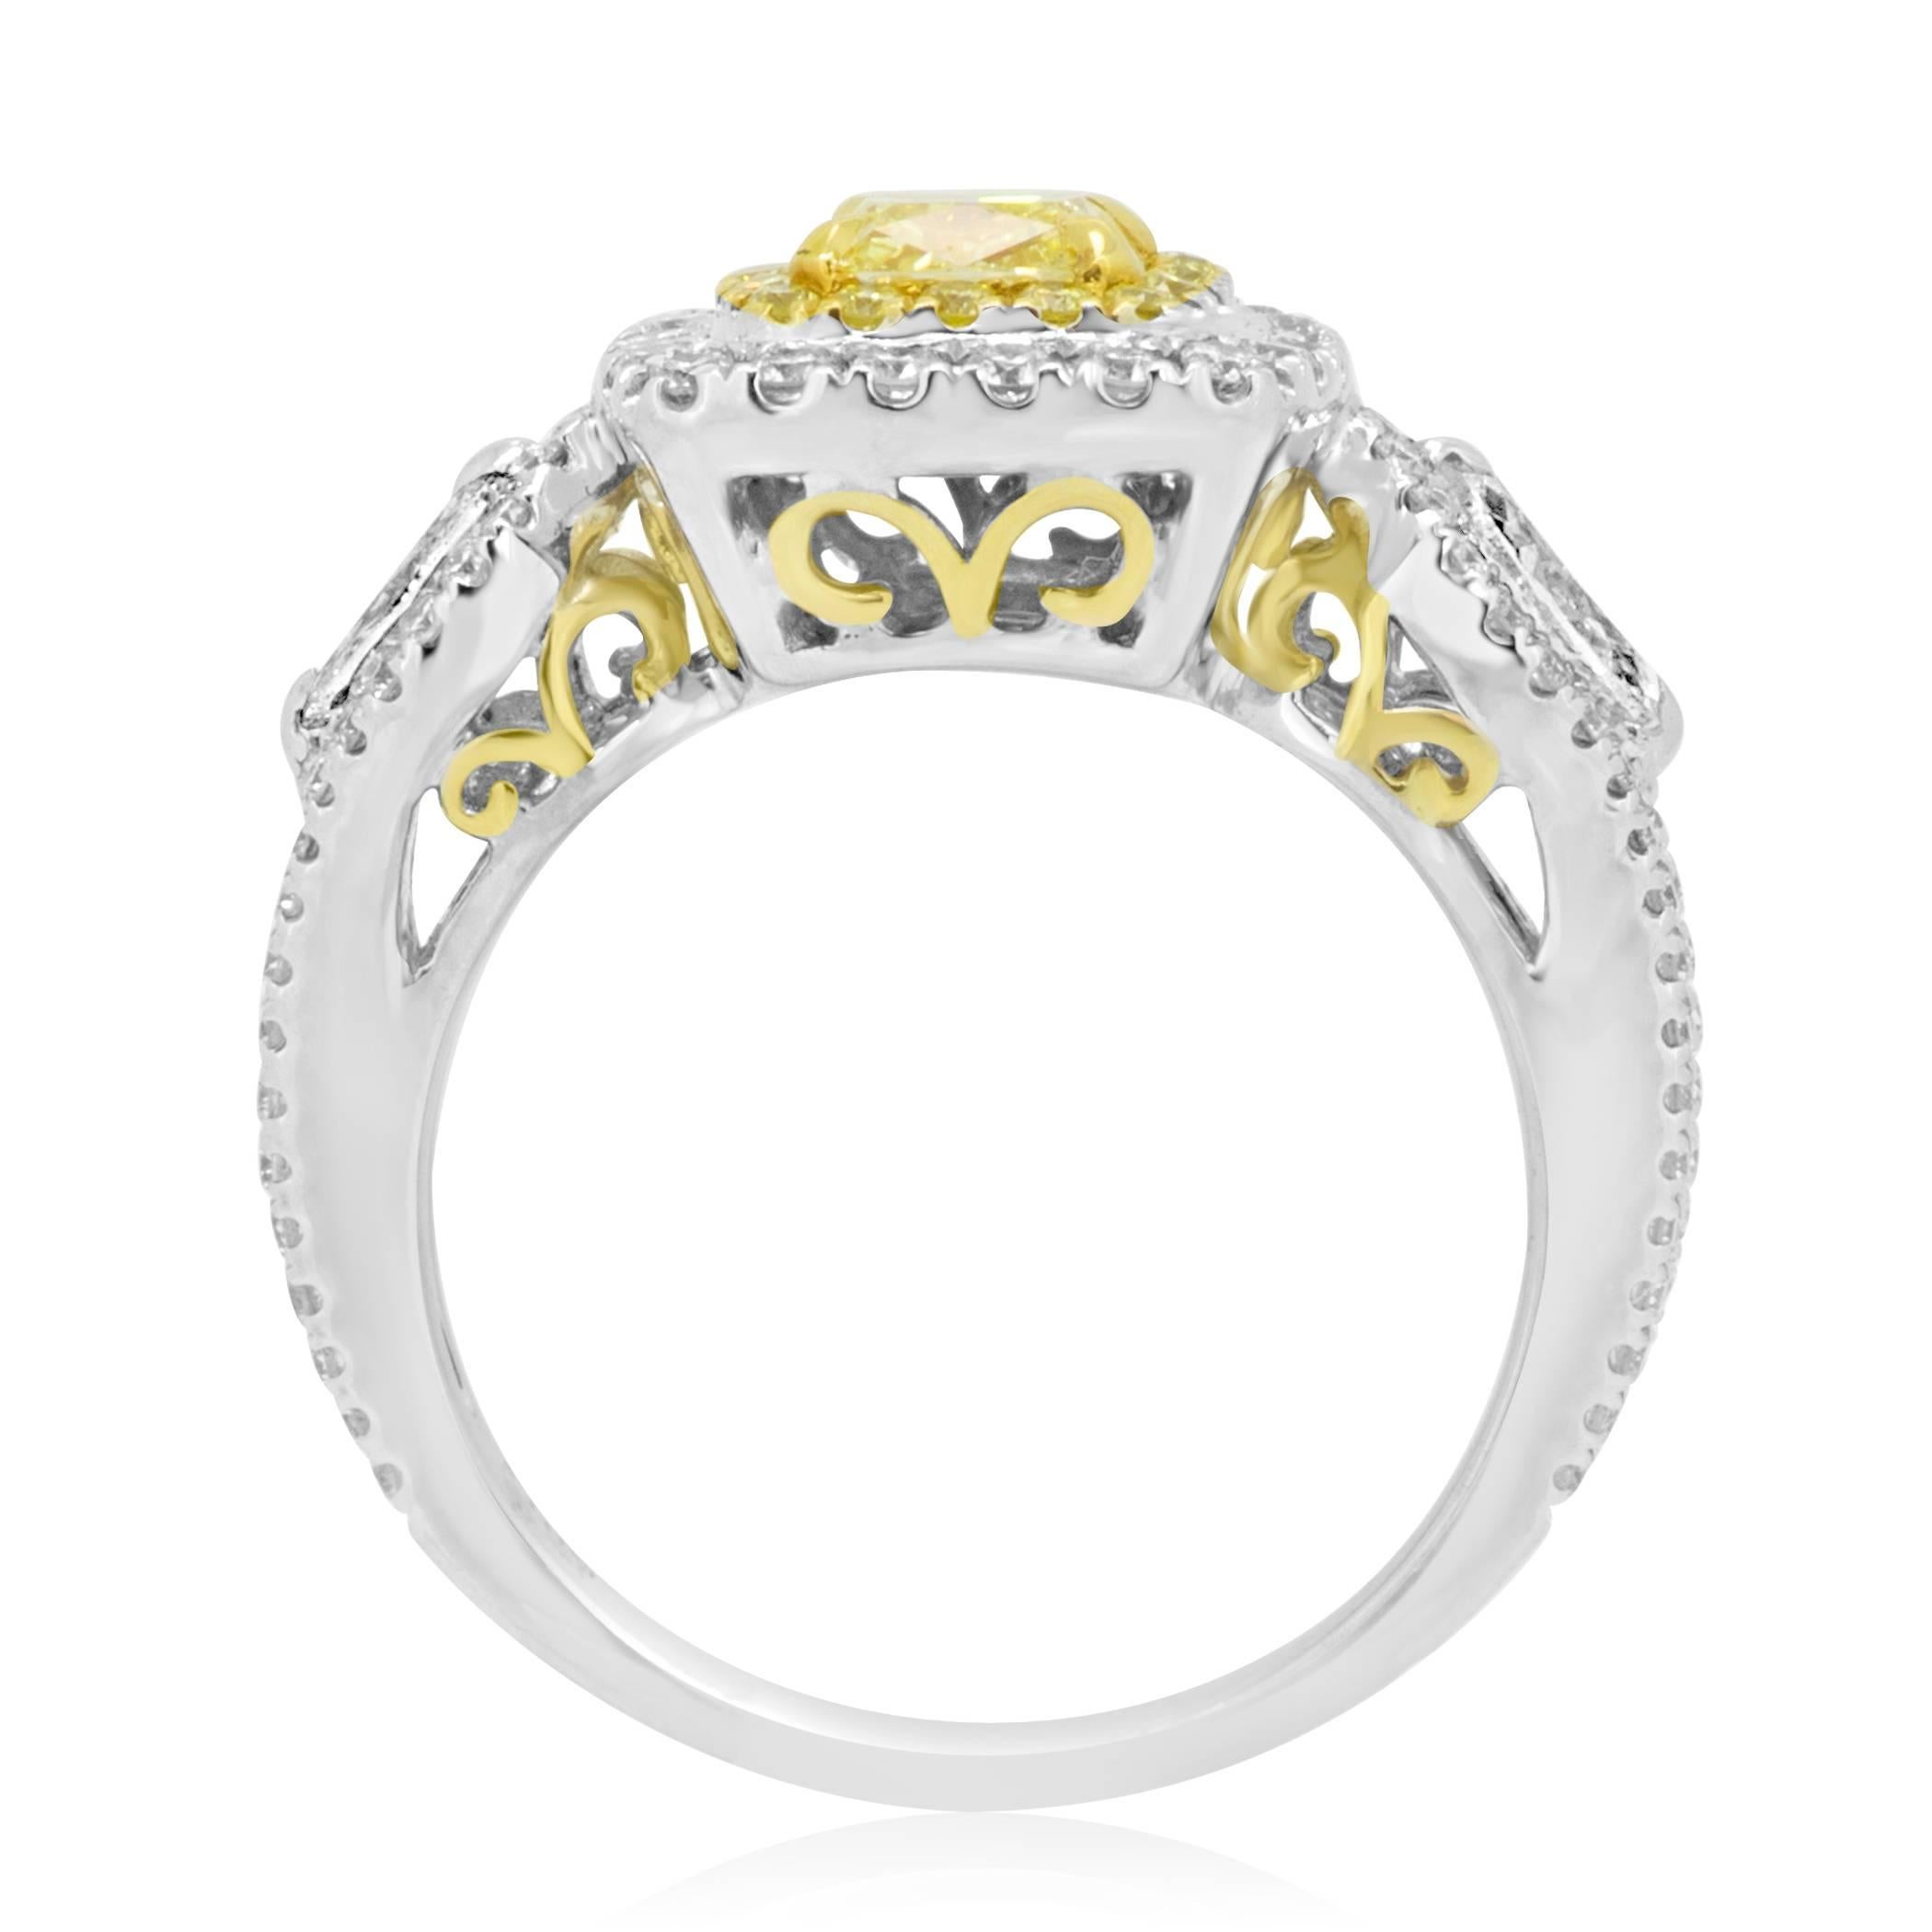 Certified Fancy Intense Yellow VS Diamond Double Halo Two Color Gold Bridal Ring 1